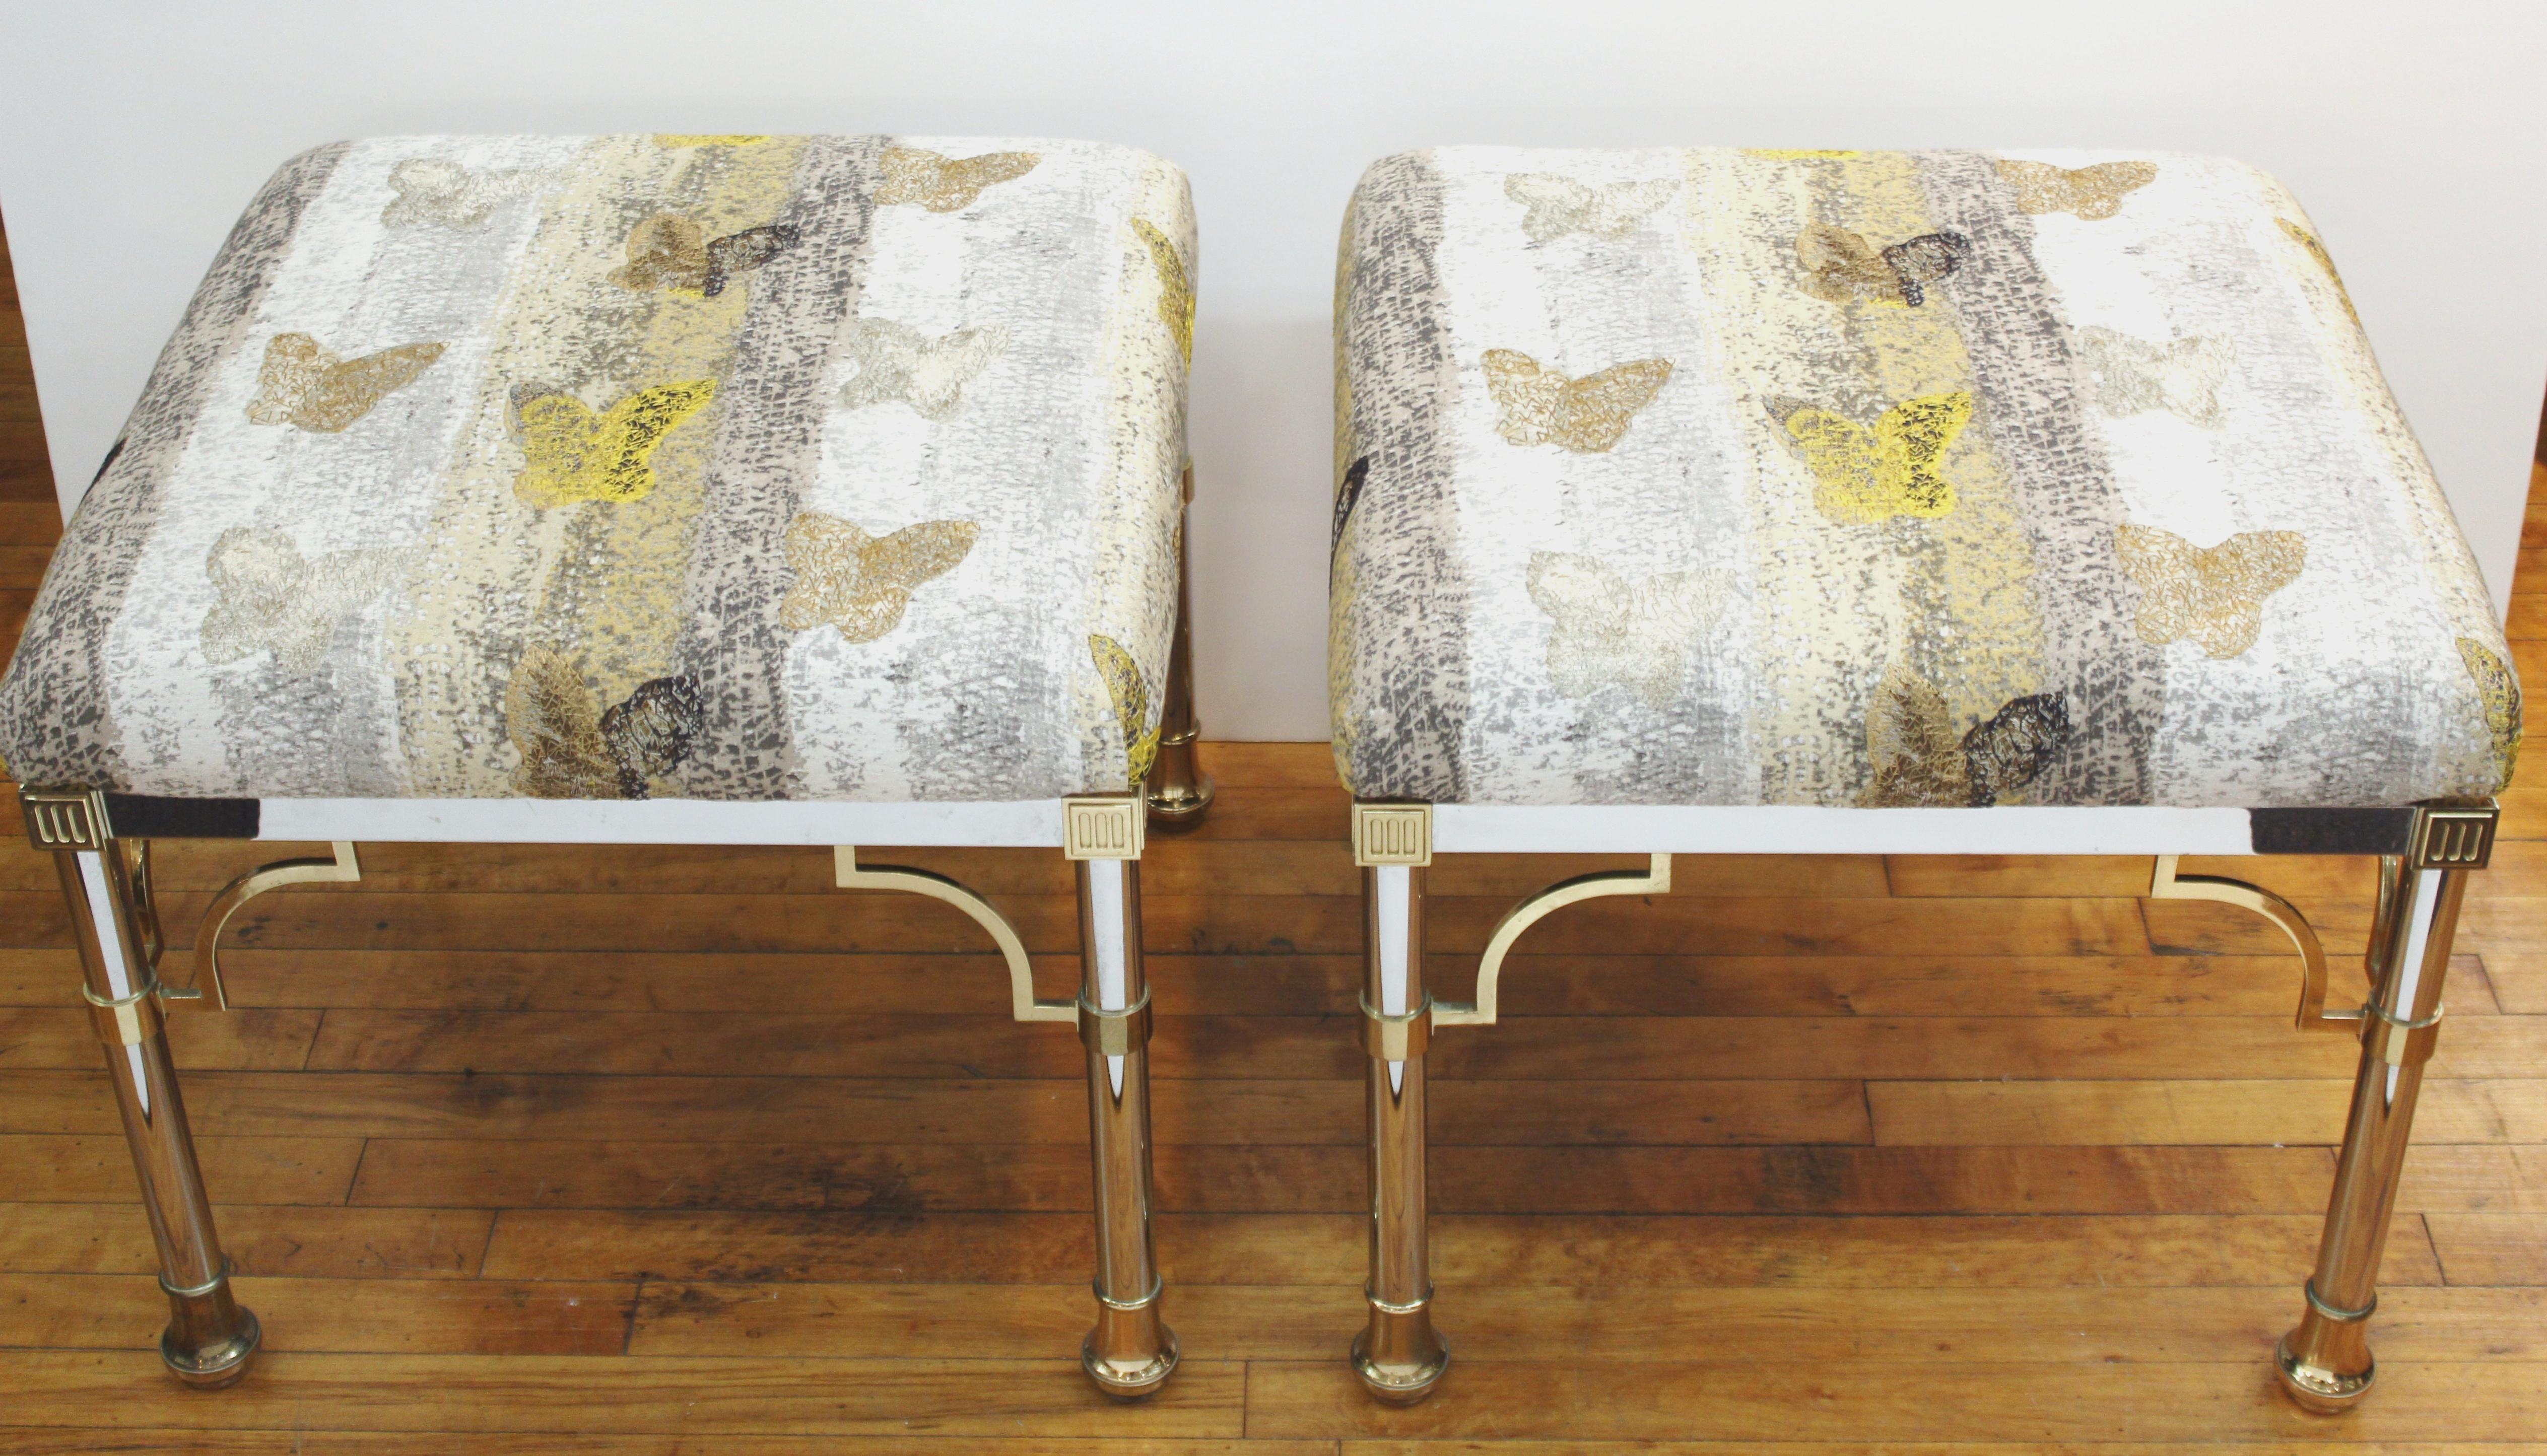 Maison Jansen Hollywood Regency benches in chrome and brass dating from the 1970s. Features a chrome frame with brass decorative accents and new upholstery by Hunt Slonem for Groundworks. The fabric is titled 'Butterflies